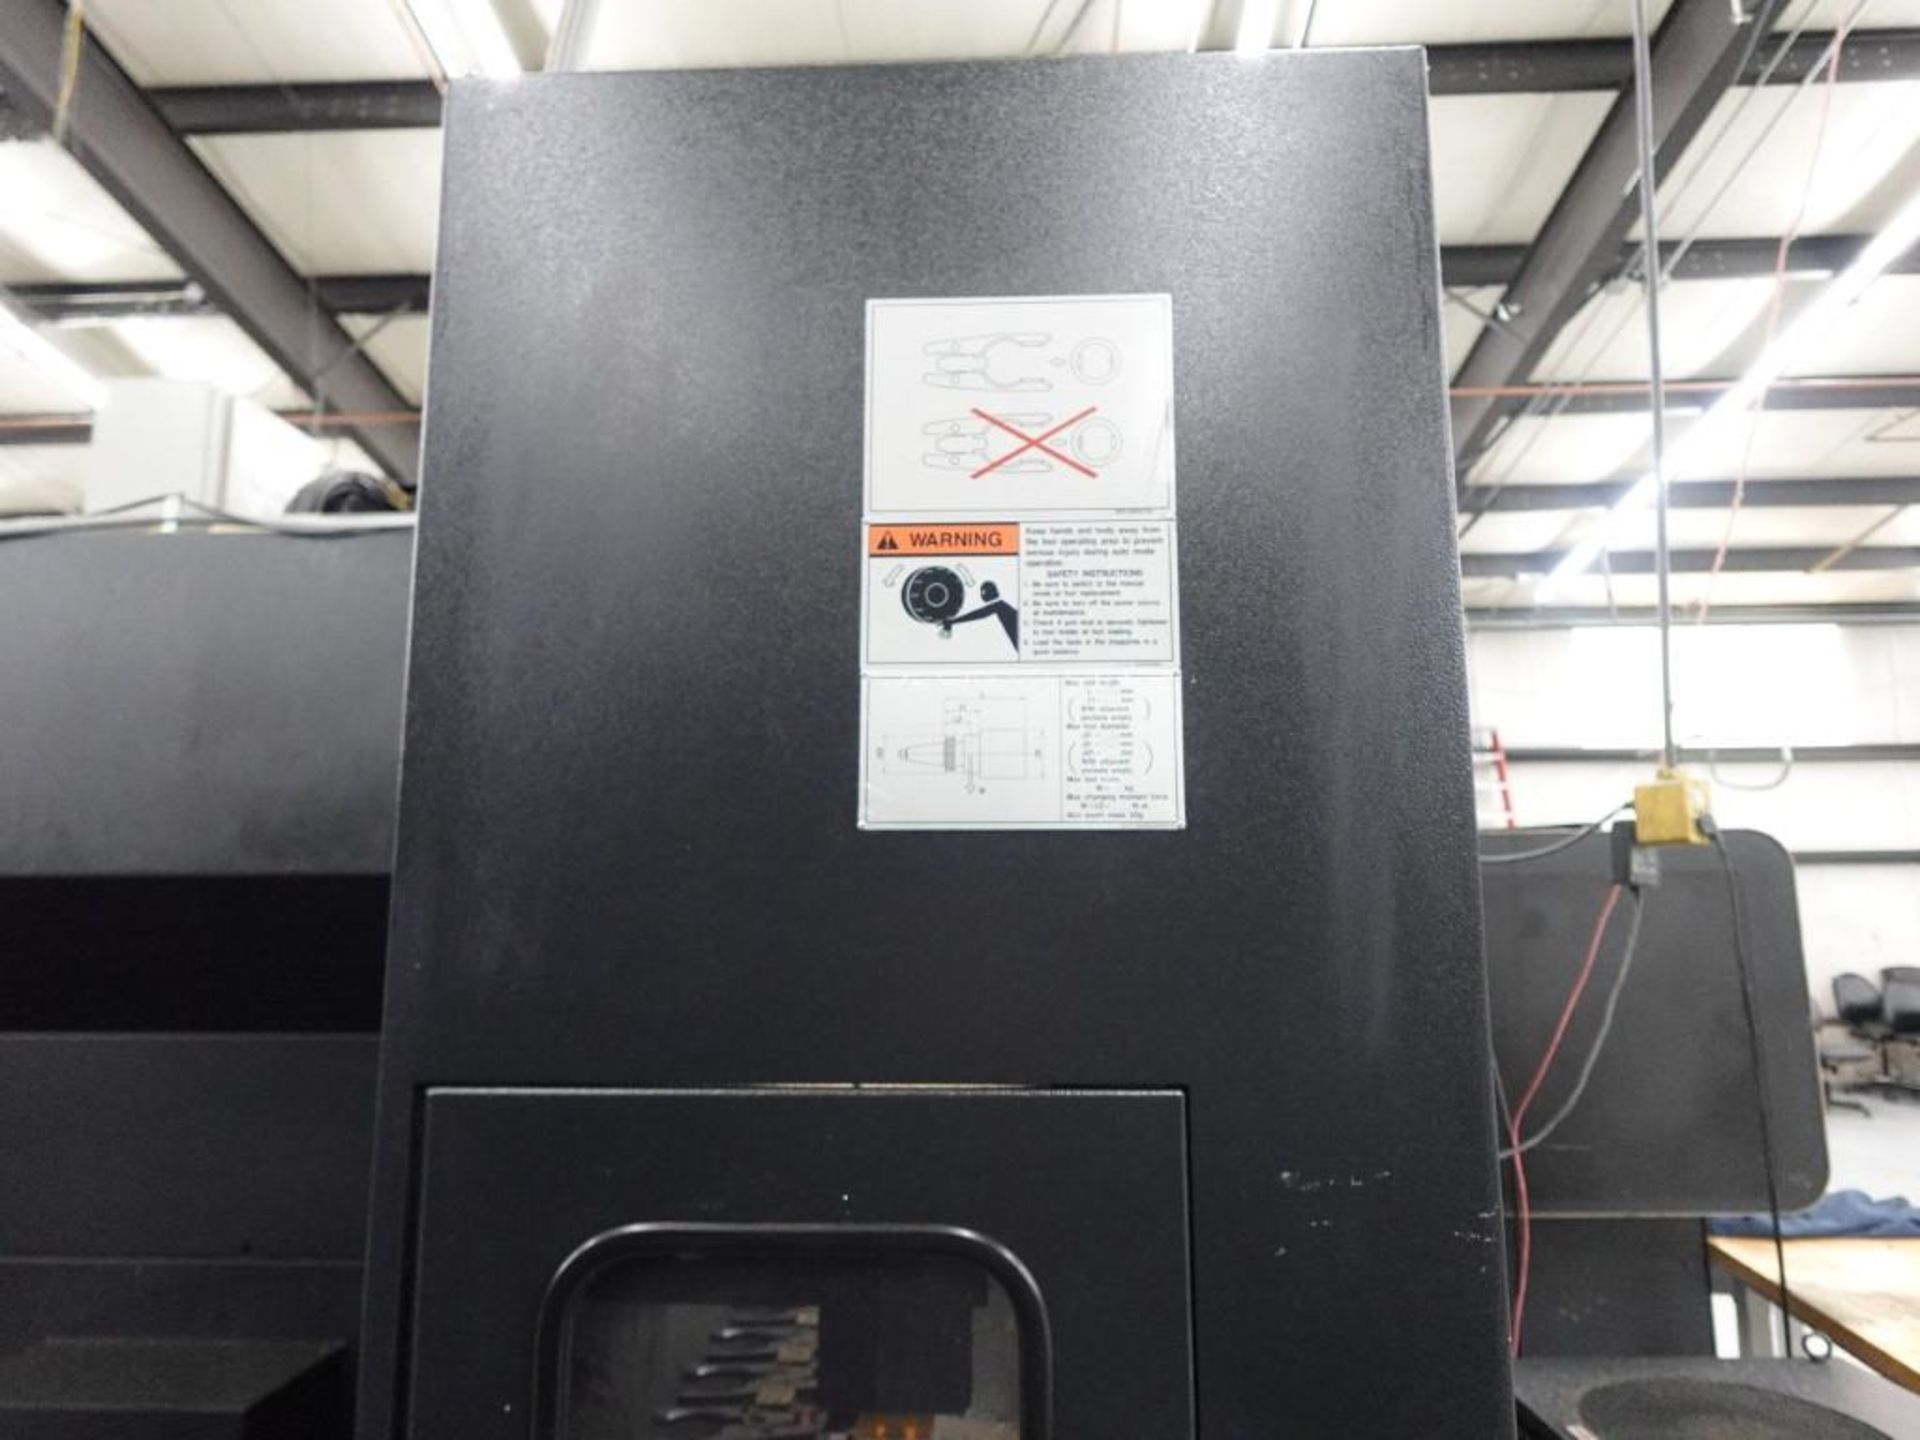 Mazak Variaxis 500-5X 5-Axis CNC Vertical Machining Center with Pallet Changer - Image 9 of 20